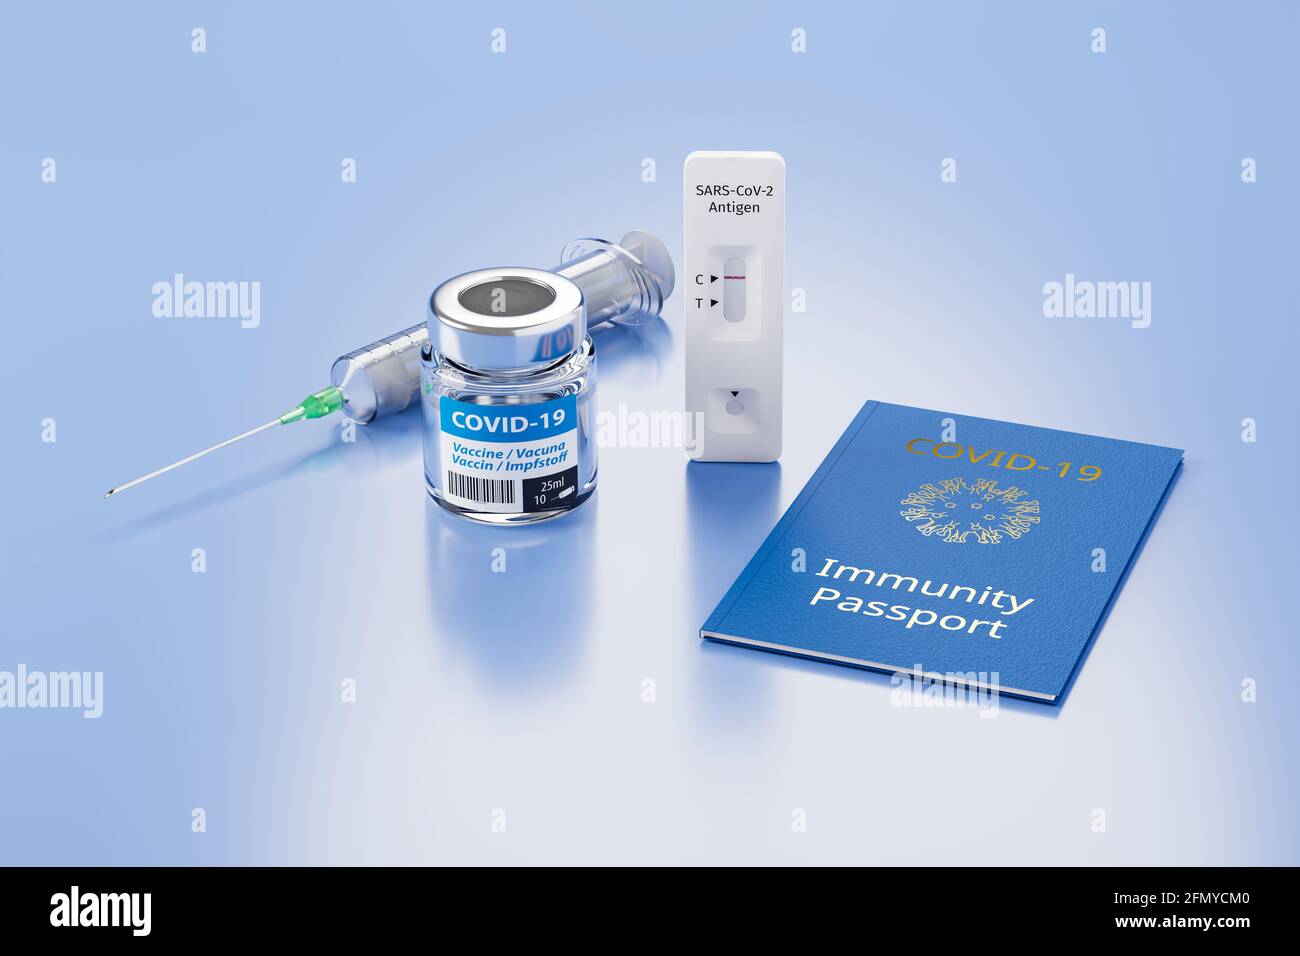 Immunity Passport concept: A vial of Covid-19 vaccine, a syringe, a negative antigen rapid test and an immunity passport mockup on a blue surface. Stock Photo